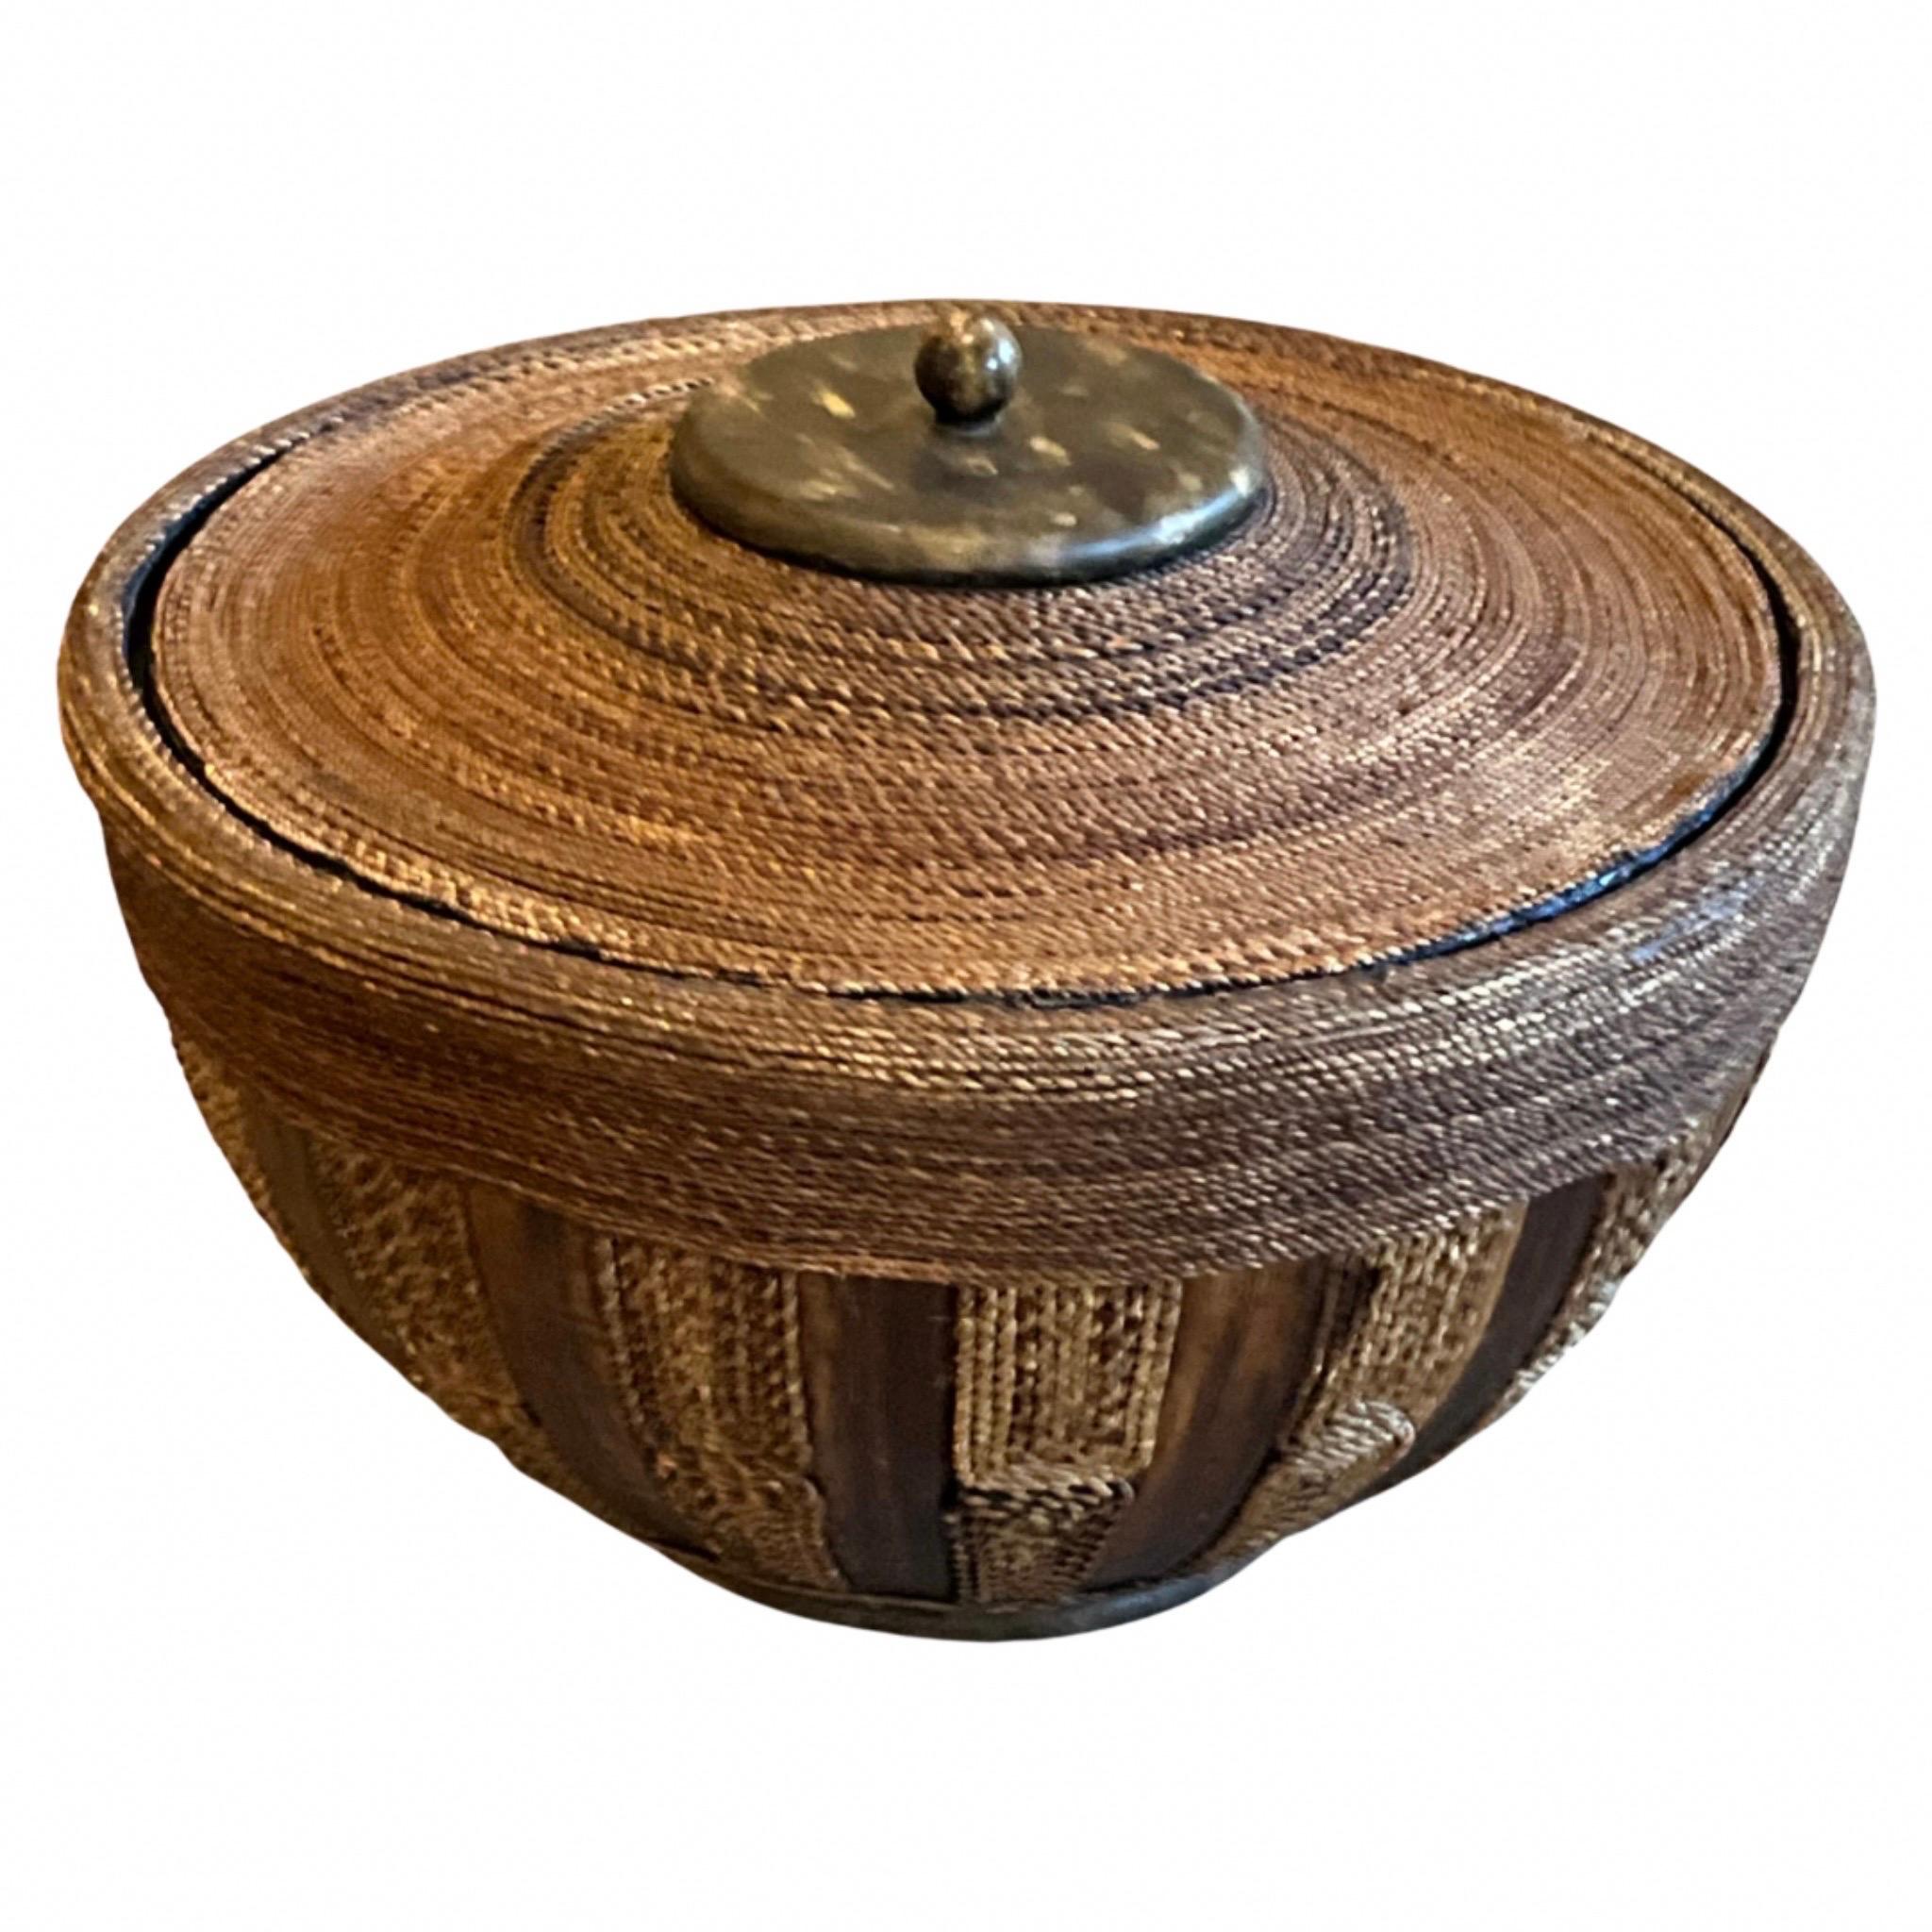 Natural Woven Fiber & Wood Container with Lid 4